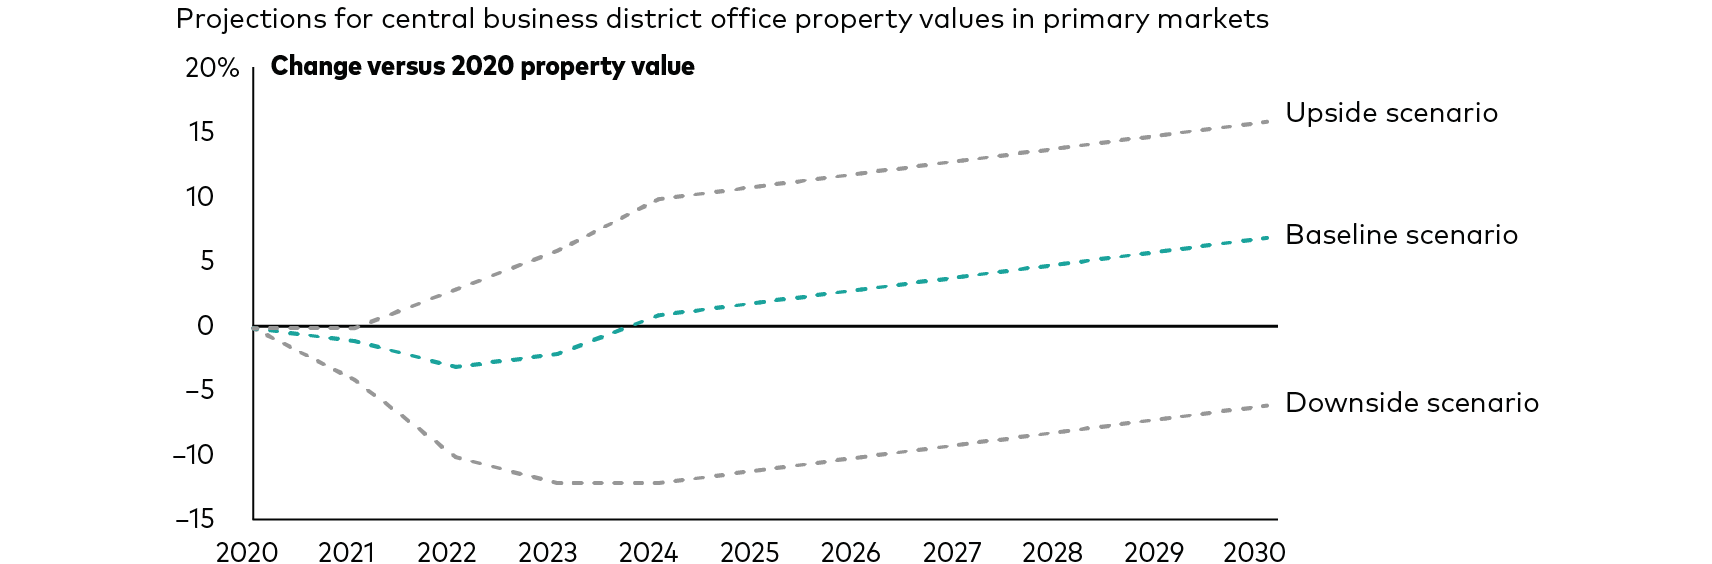 Line chart shows Vanguard’s projections for percentage changes in central business district office property values in primary markets compared with the beginning of 2020. The line for the baseline scenario shows property values falling about 3% in 2022 but surpassing the initial level by 2024 and continue trending higher. The line for the downside scenario shows property values falling about 12% in 20223/2024 and then trending higher but not surpassing the initial level even by the end of the forecast period, which is 2030. The line for the upside scenario shows property values remaining flat in 2020 through 2021 and then rising across the remainder of the forecast period. 